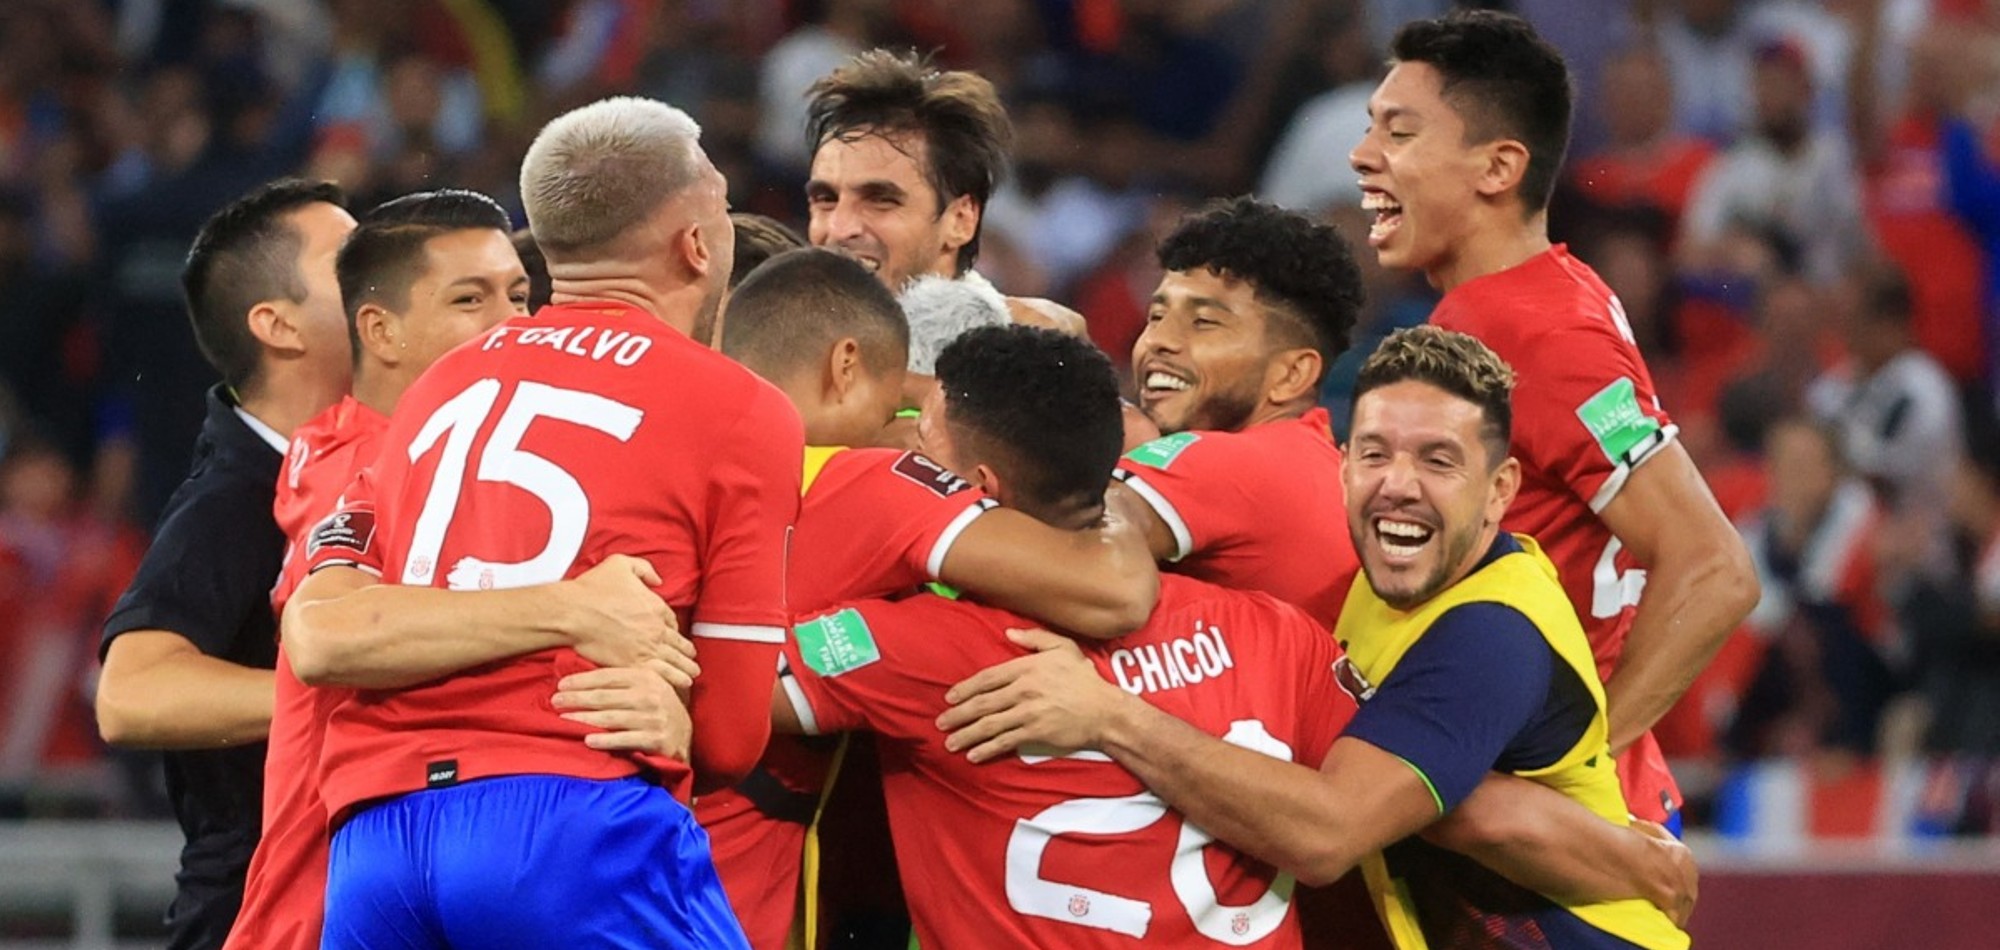 Costa Rica qualify for the 2022 FIFA World Cup in Qatar